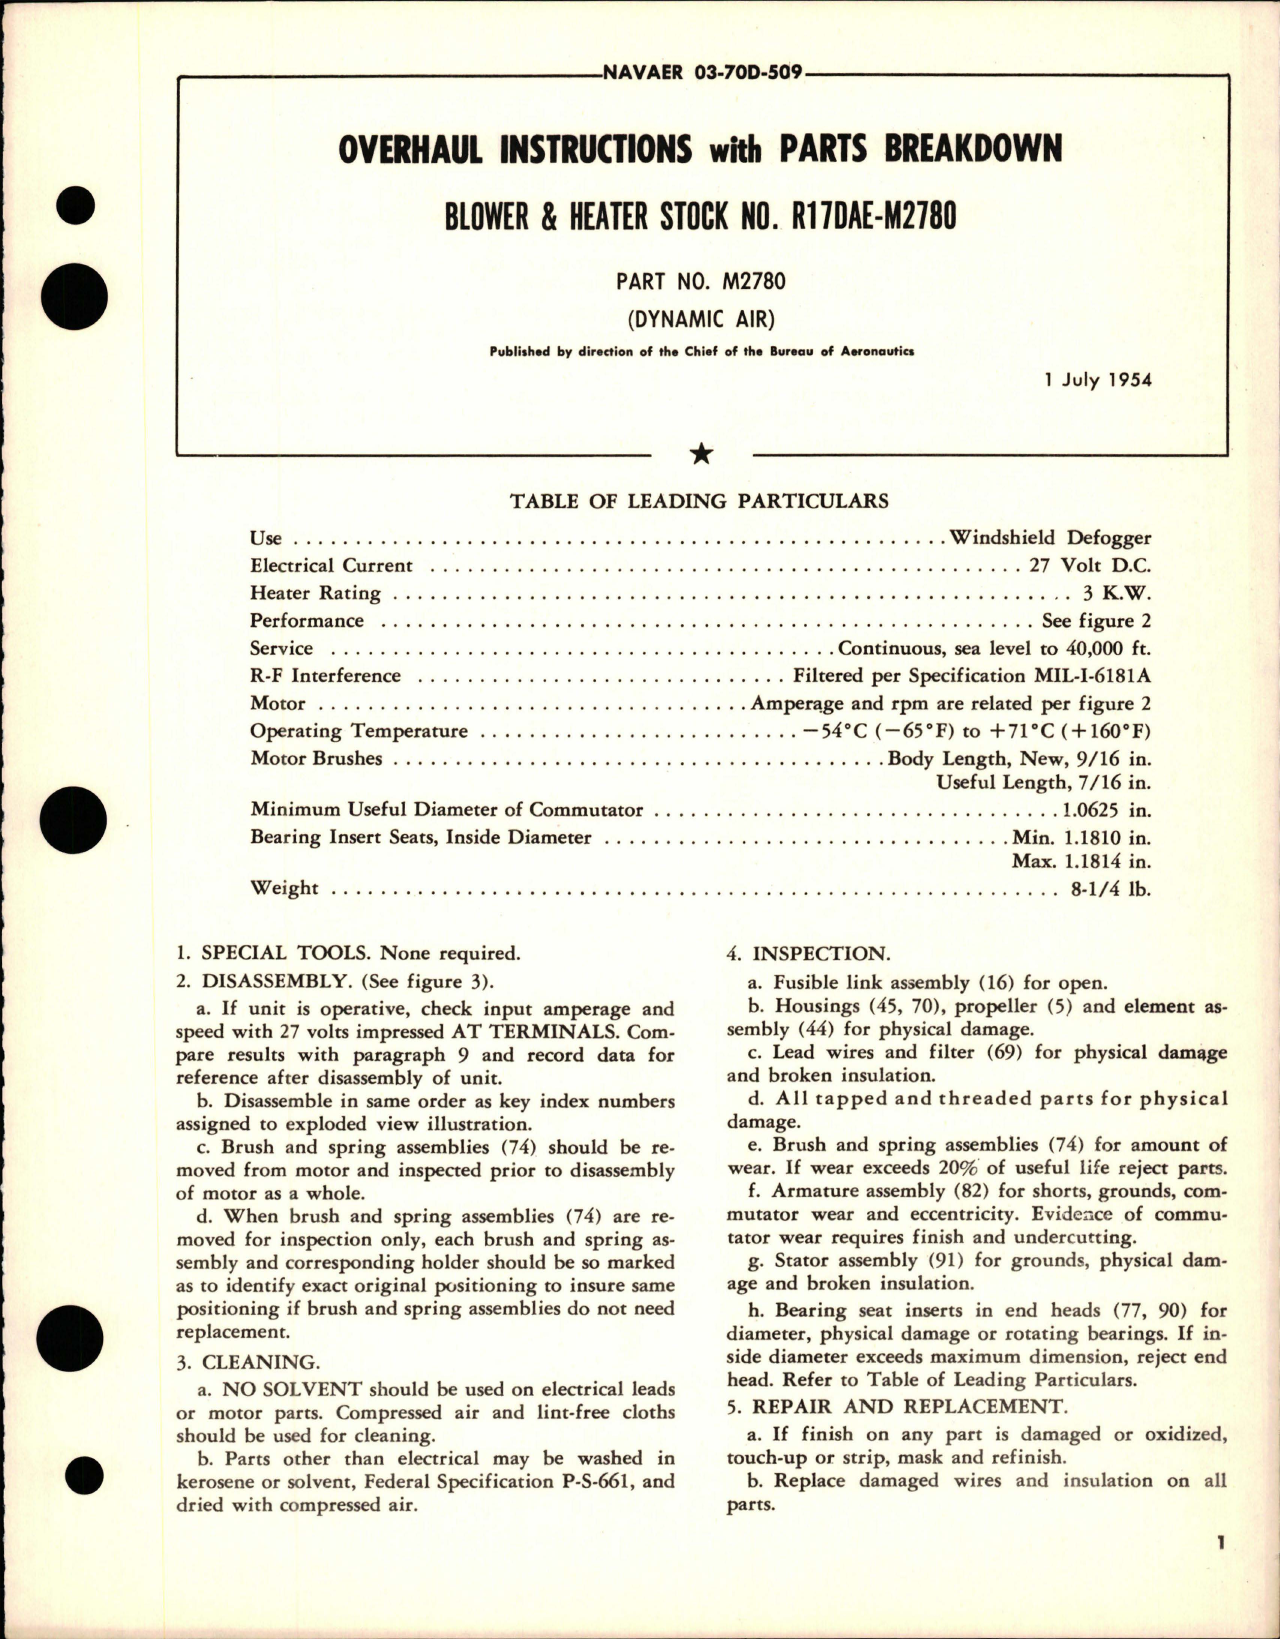 Sample page 1 from AirCorps Library document: Overhaul Instructions with Parts Breakdown for Blower and Heater - Part M2780